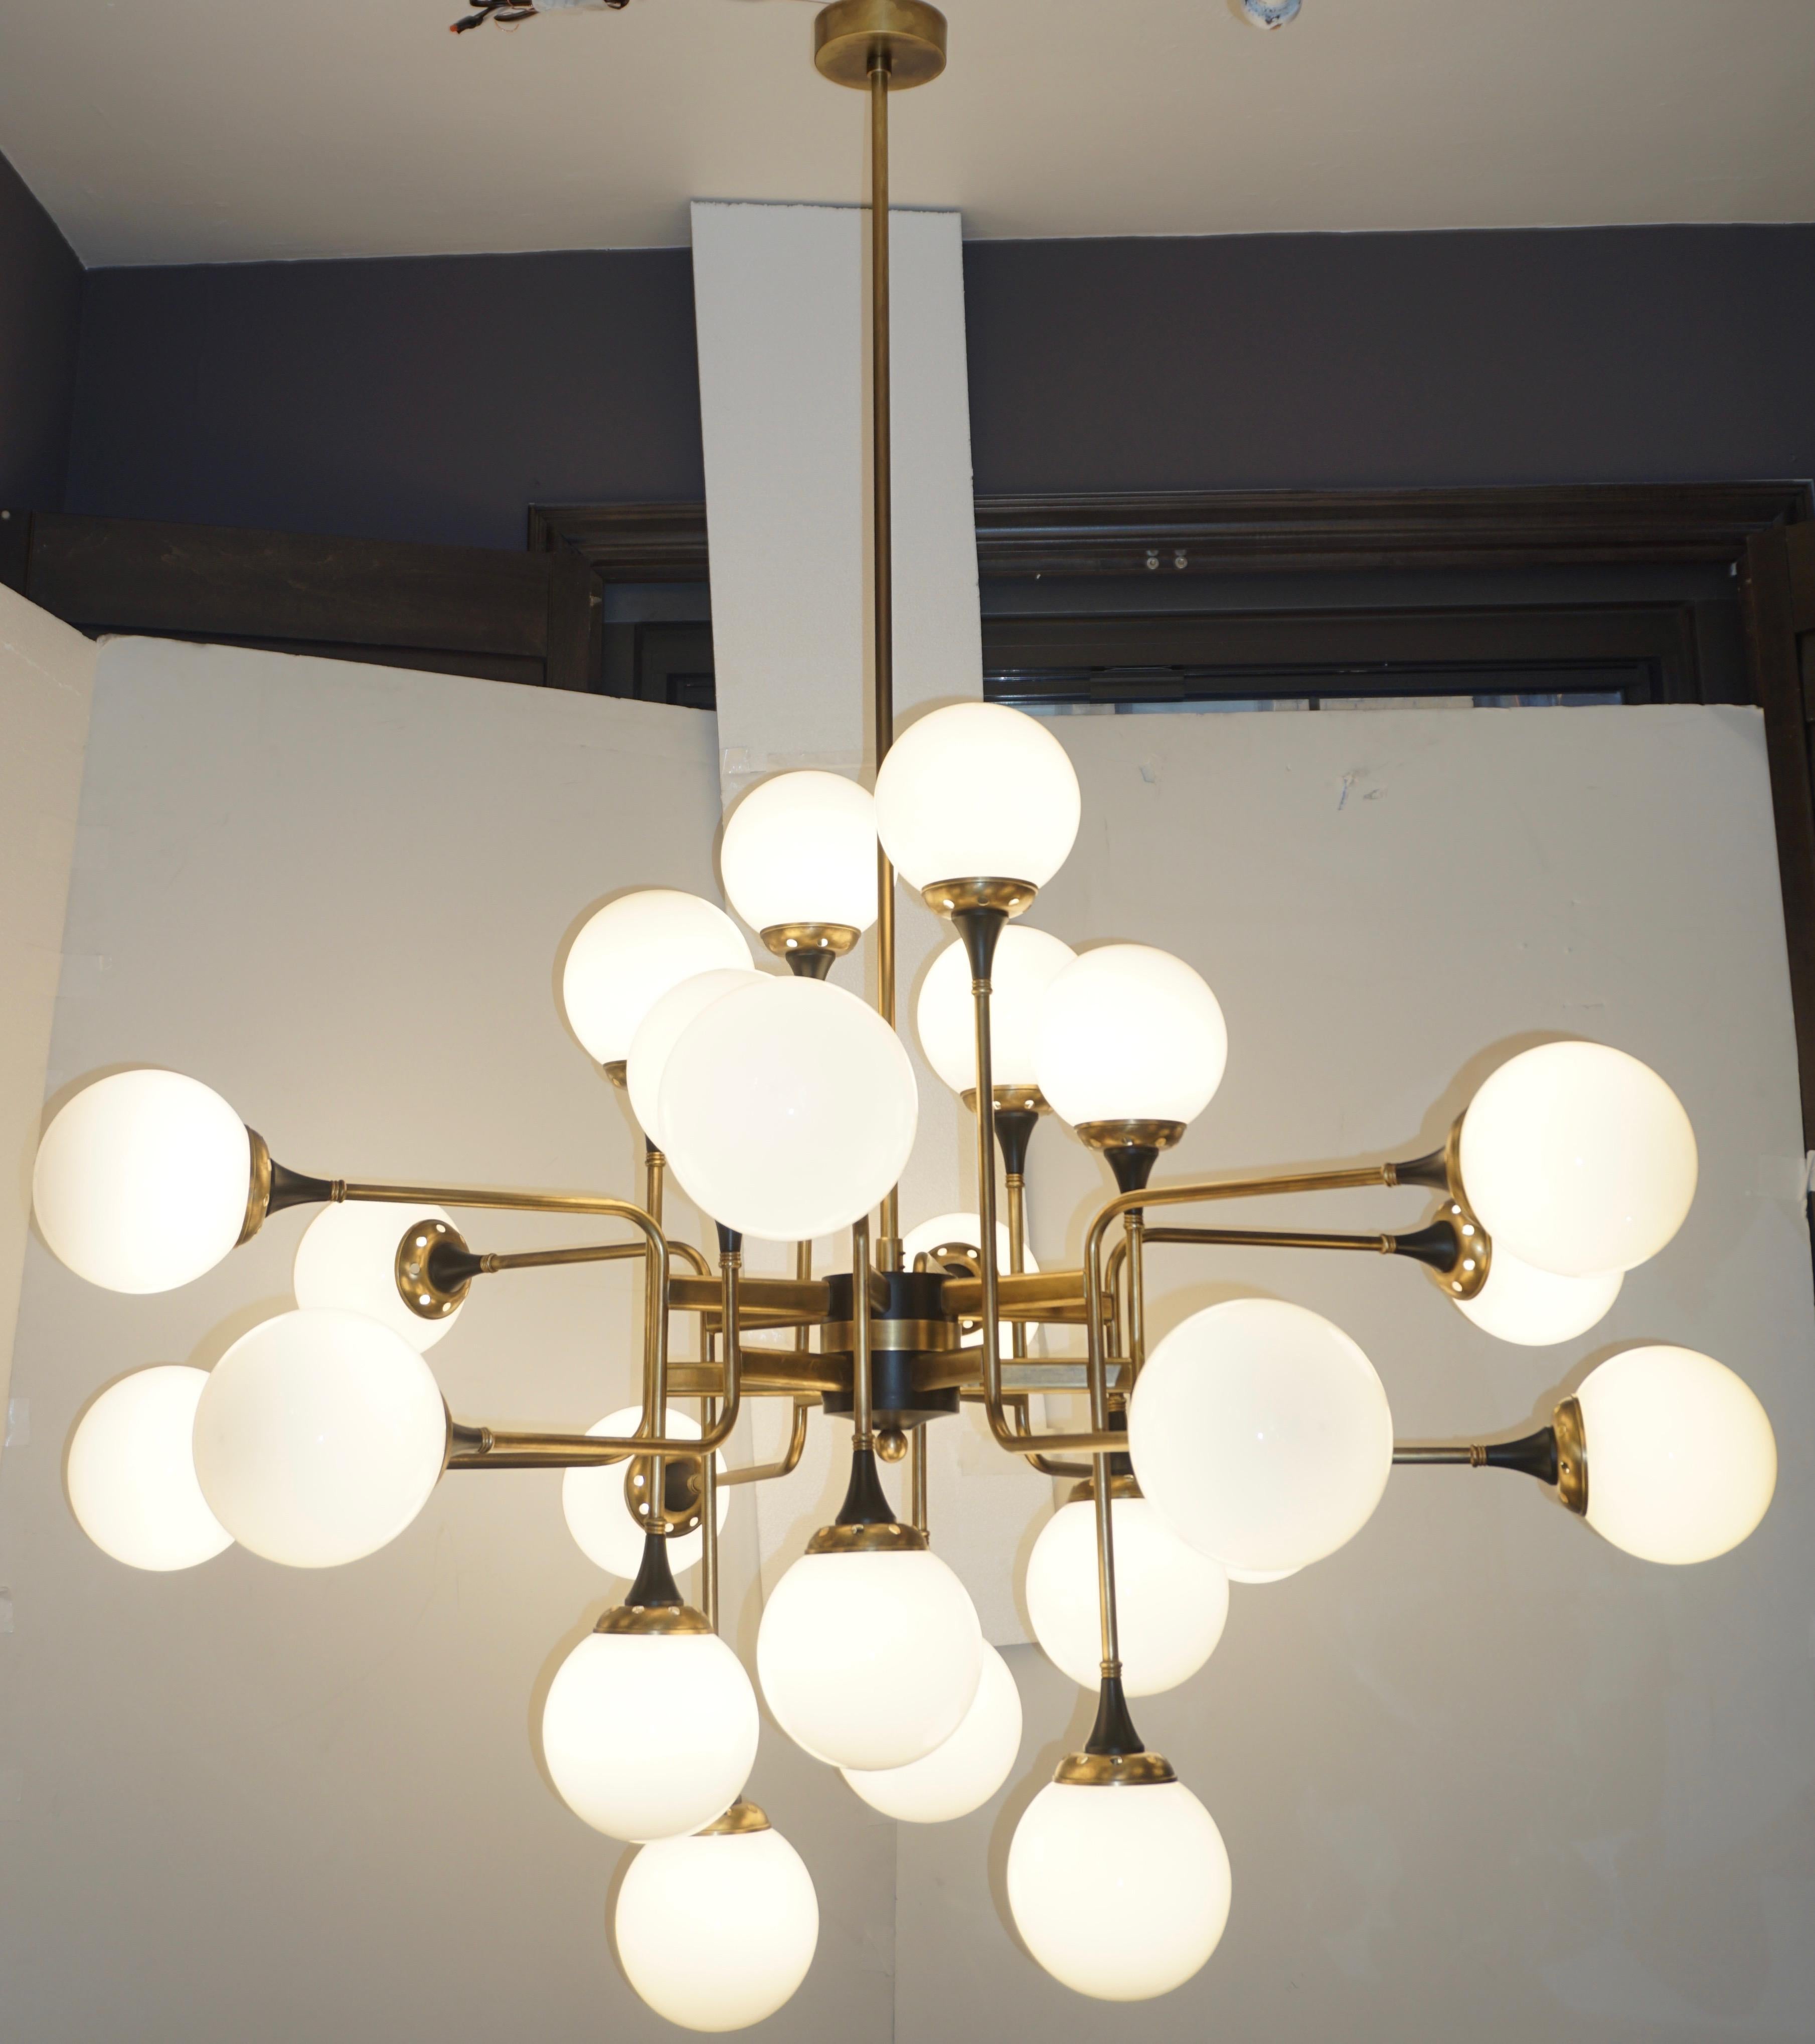 Contemporary custom made chandelier of grand scale and mid-century modern geometric design with a Sputnik inspiration, entirely handcrafted in Italy. The brass structure with a vintage finish is composed of 12 asymmetric bent arms to support 24